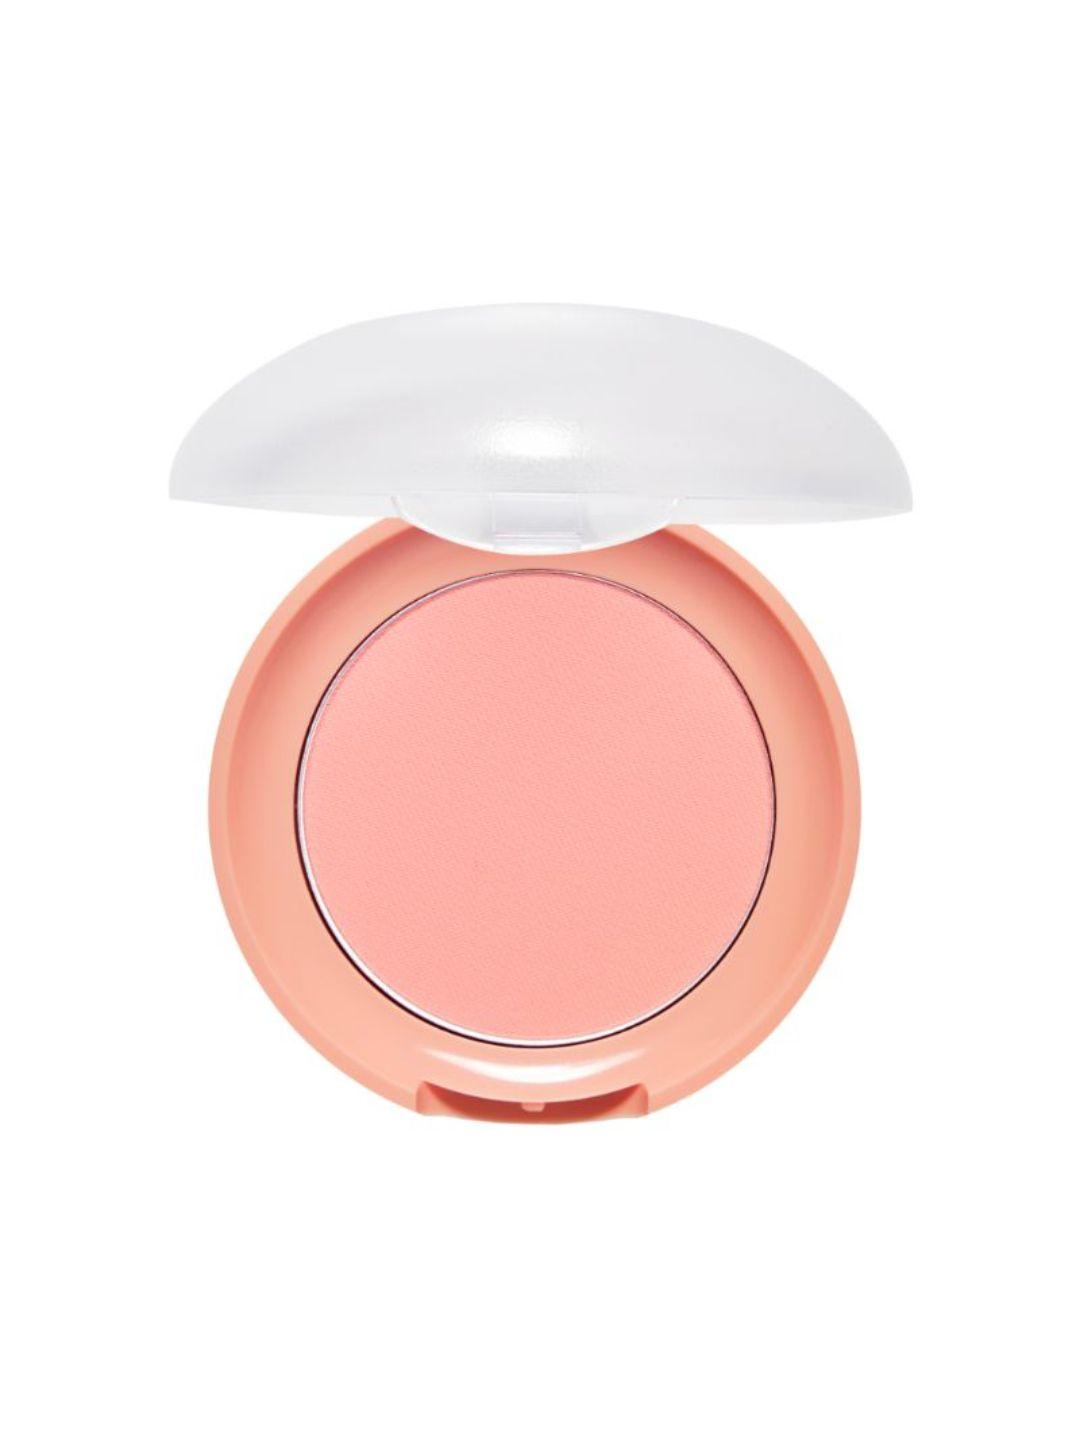 etude lovely cookie blusher - apricot peach mousse or201